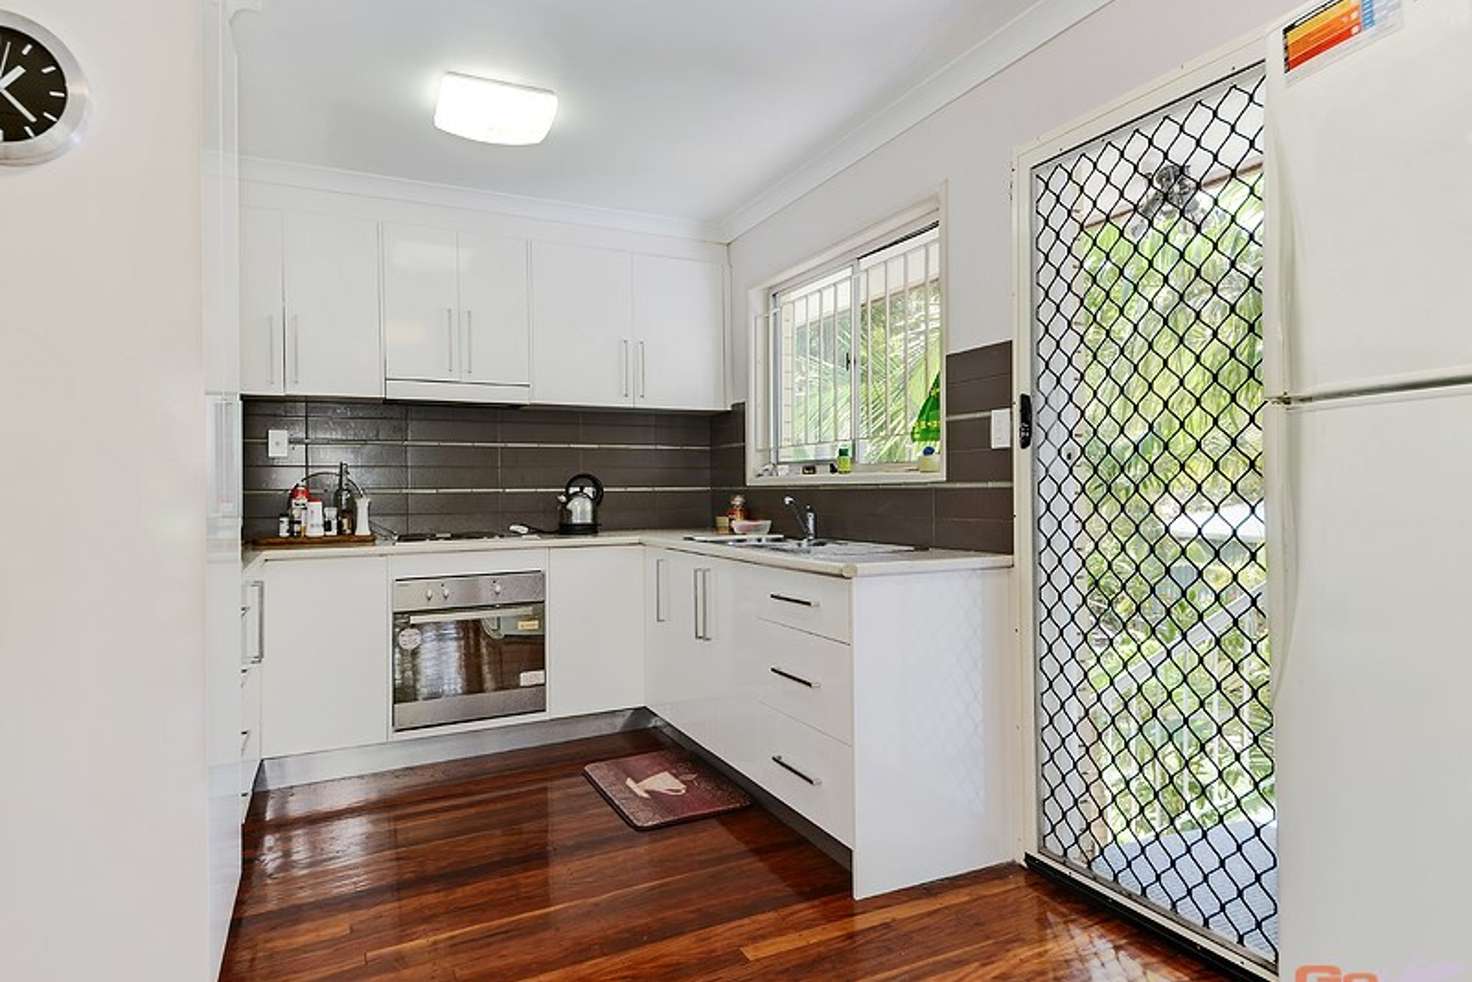 Main view of Homely house listing, 2 Allsop Street, Lawnton QLD 4501